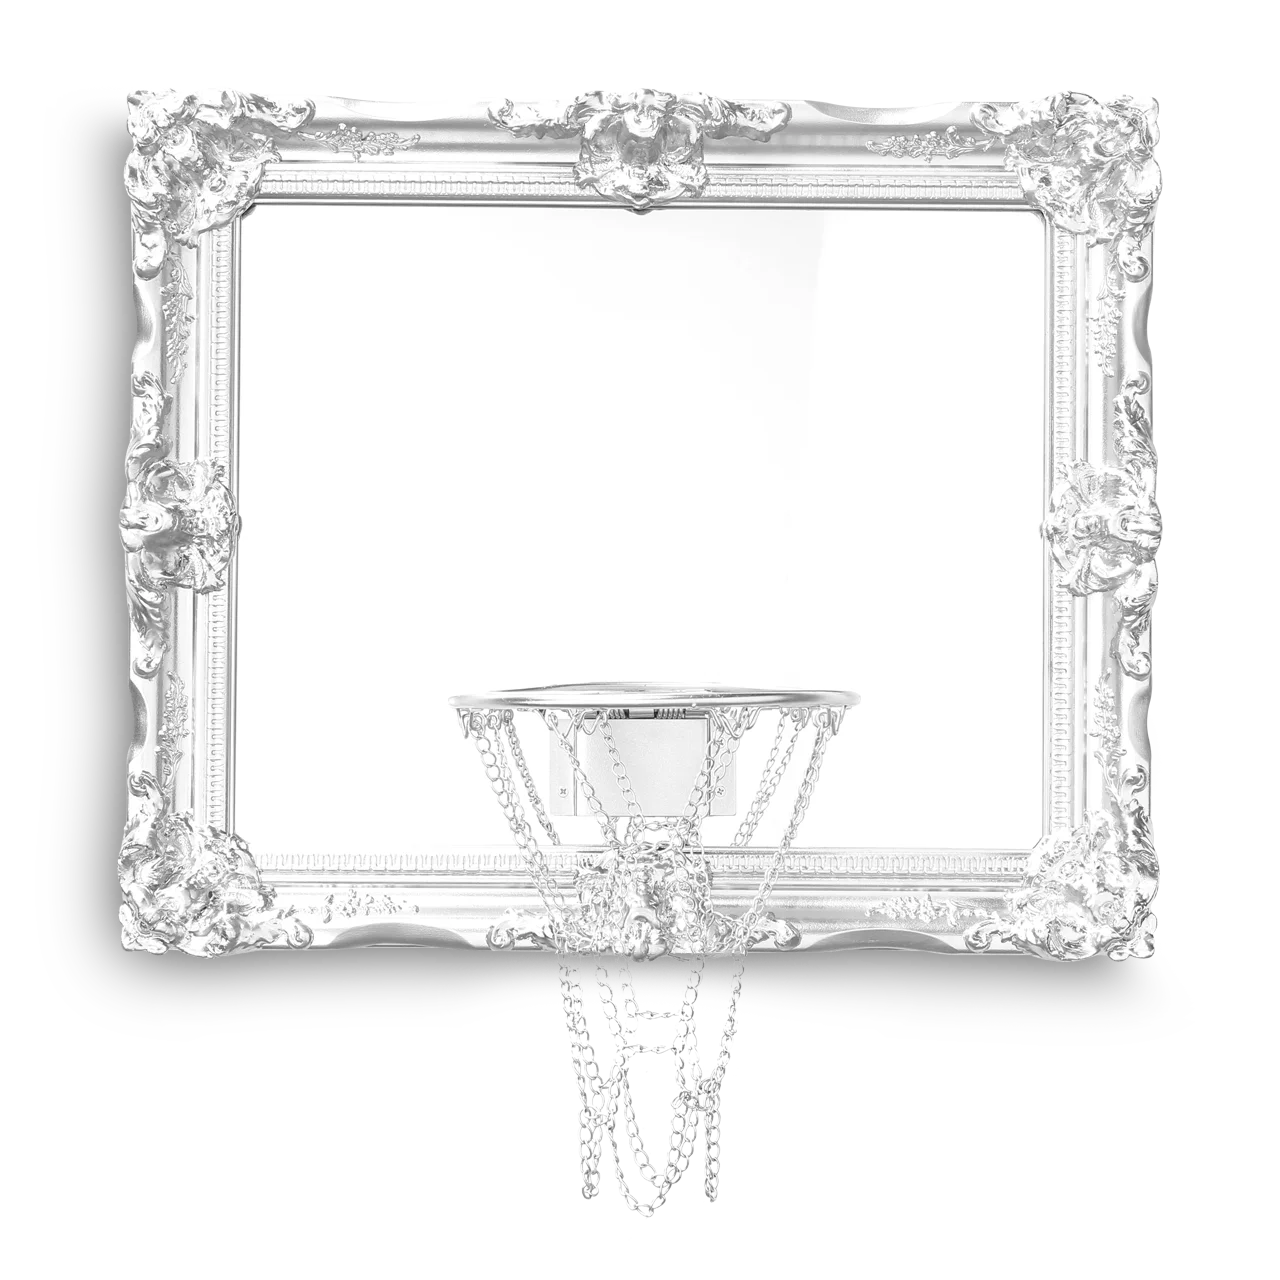 An ornate frame with a decorative Mirror Hoop.